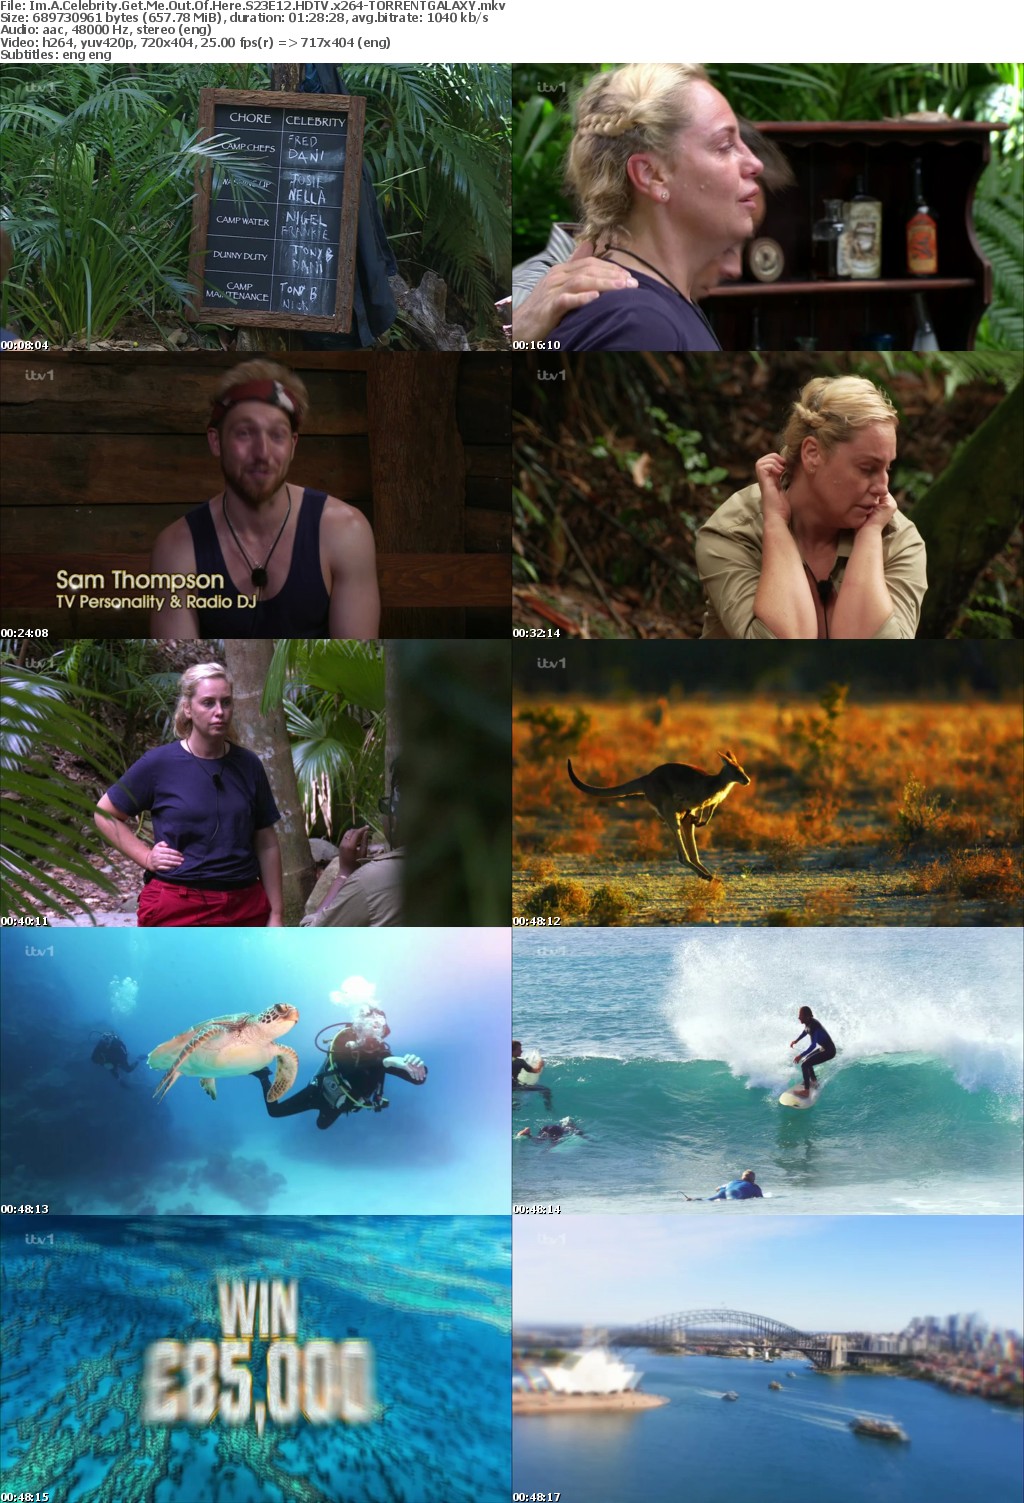 Im A Celebrity Get Me Out Of Here S23E12 HDTV x264-GALAXY